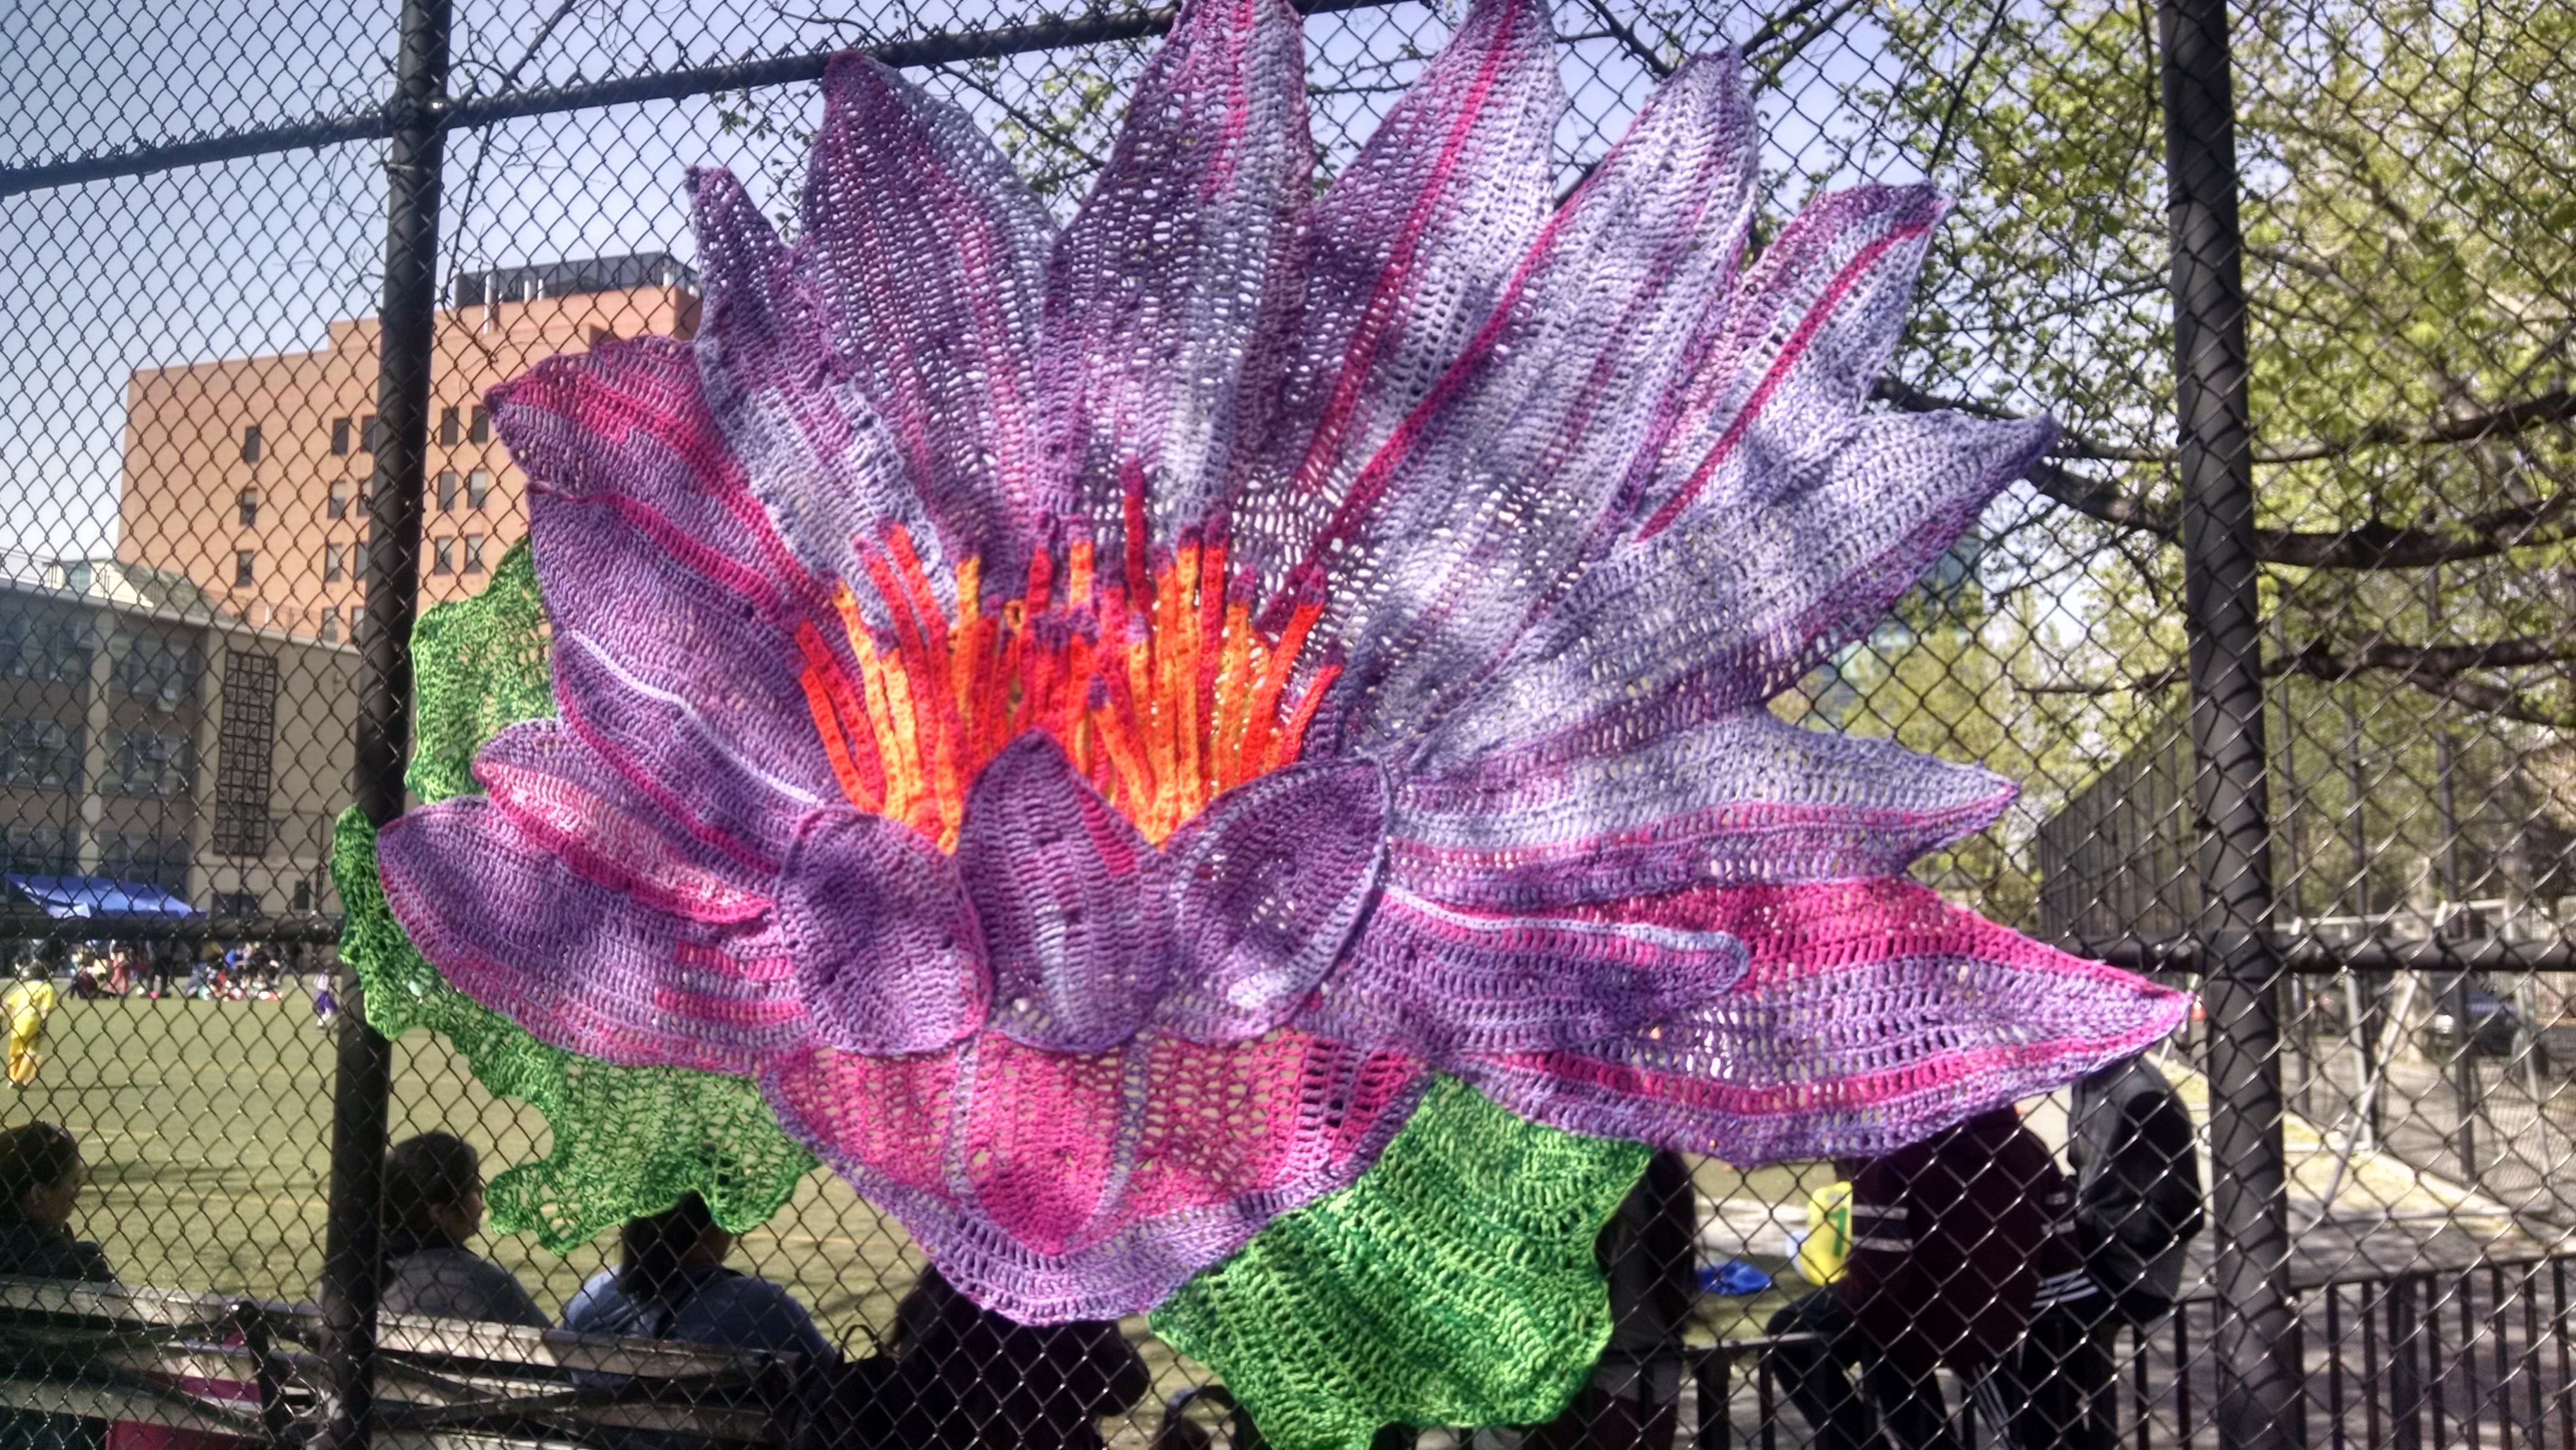 yarn weaved into chain link fence to make a large flower of pink and purple